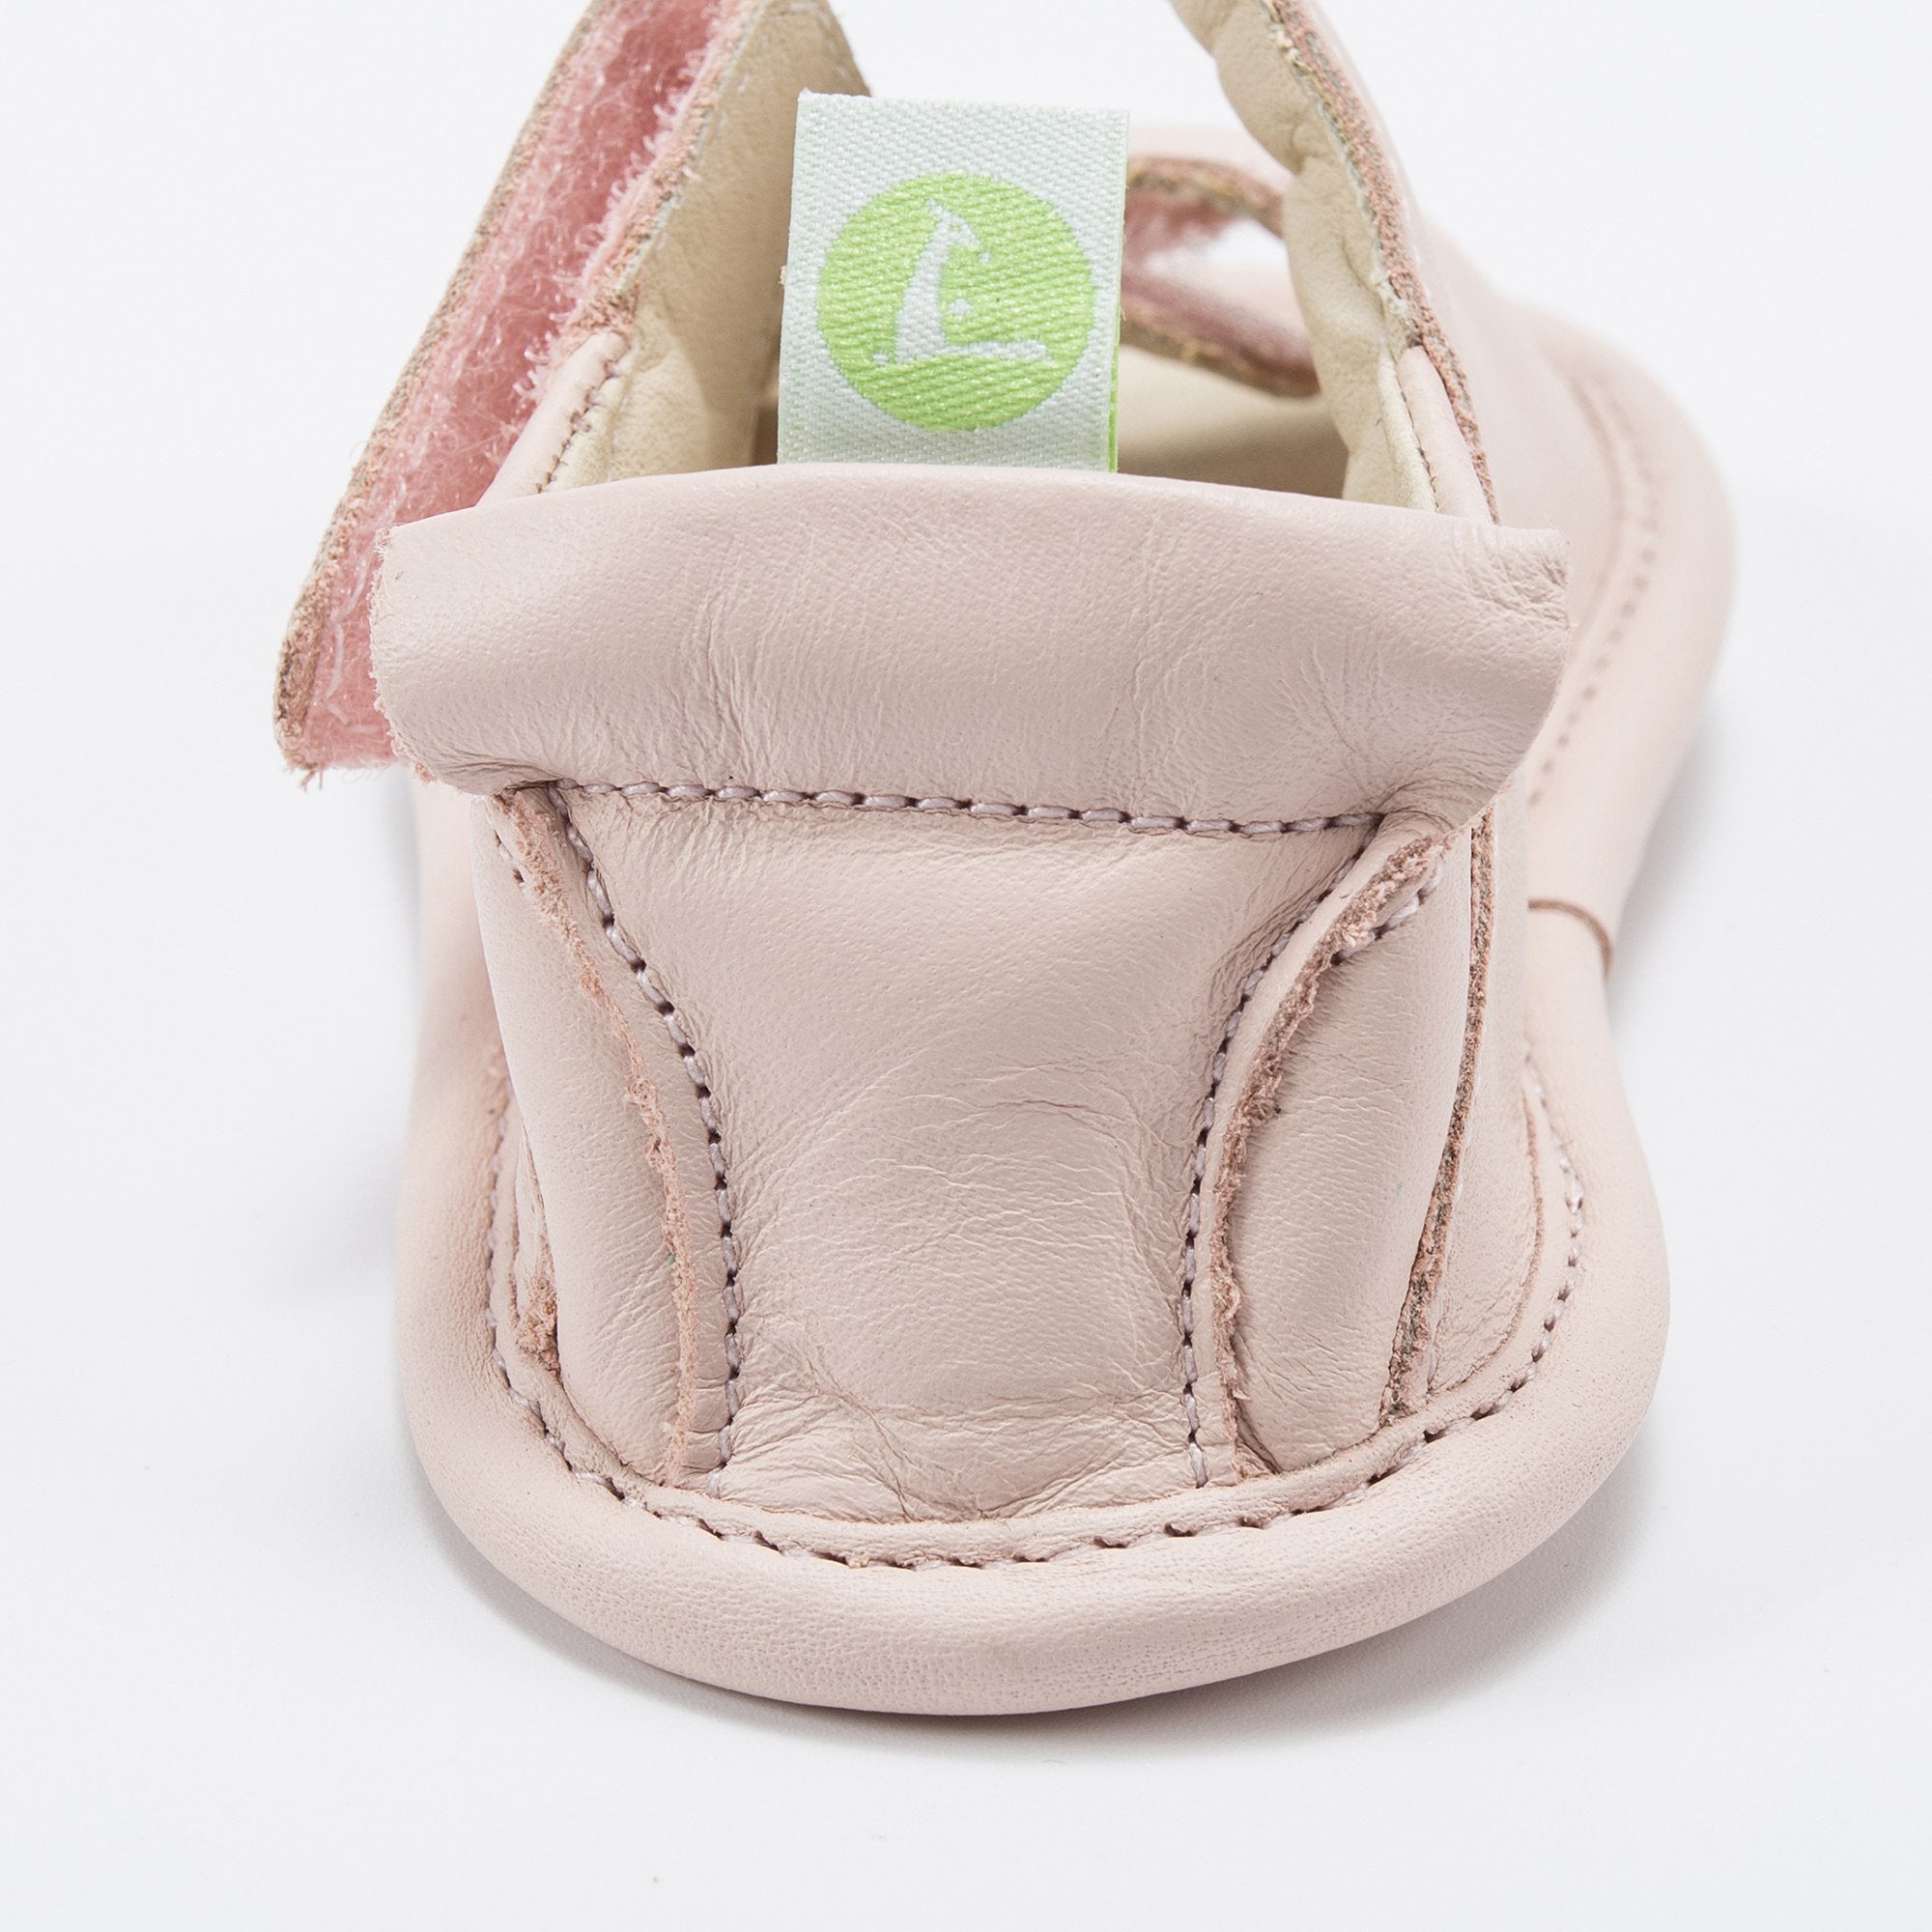 Baby Girls Cotton Candy Leather Sandal